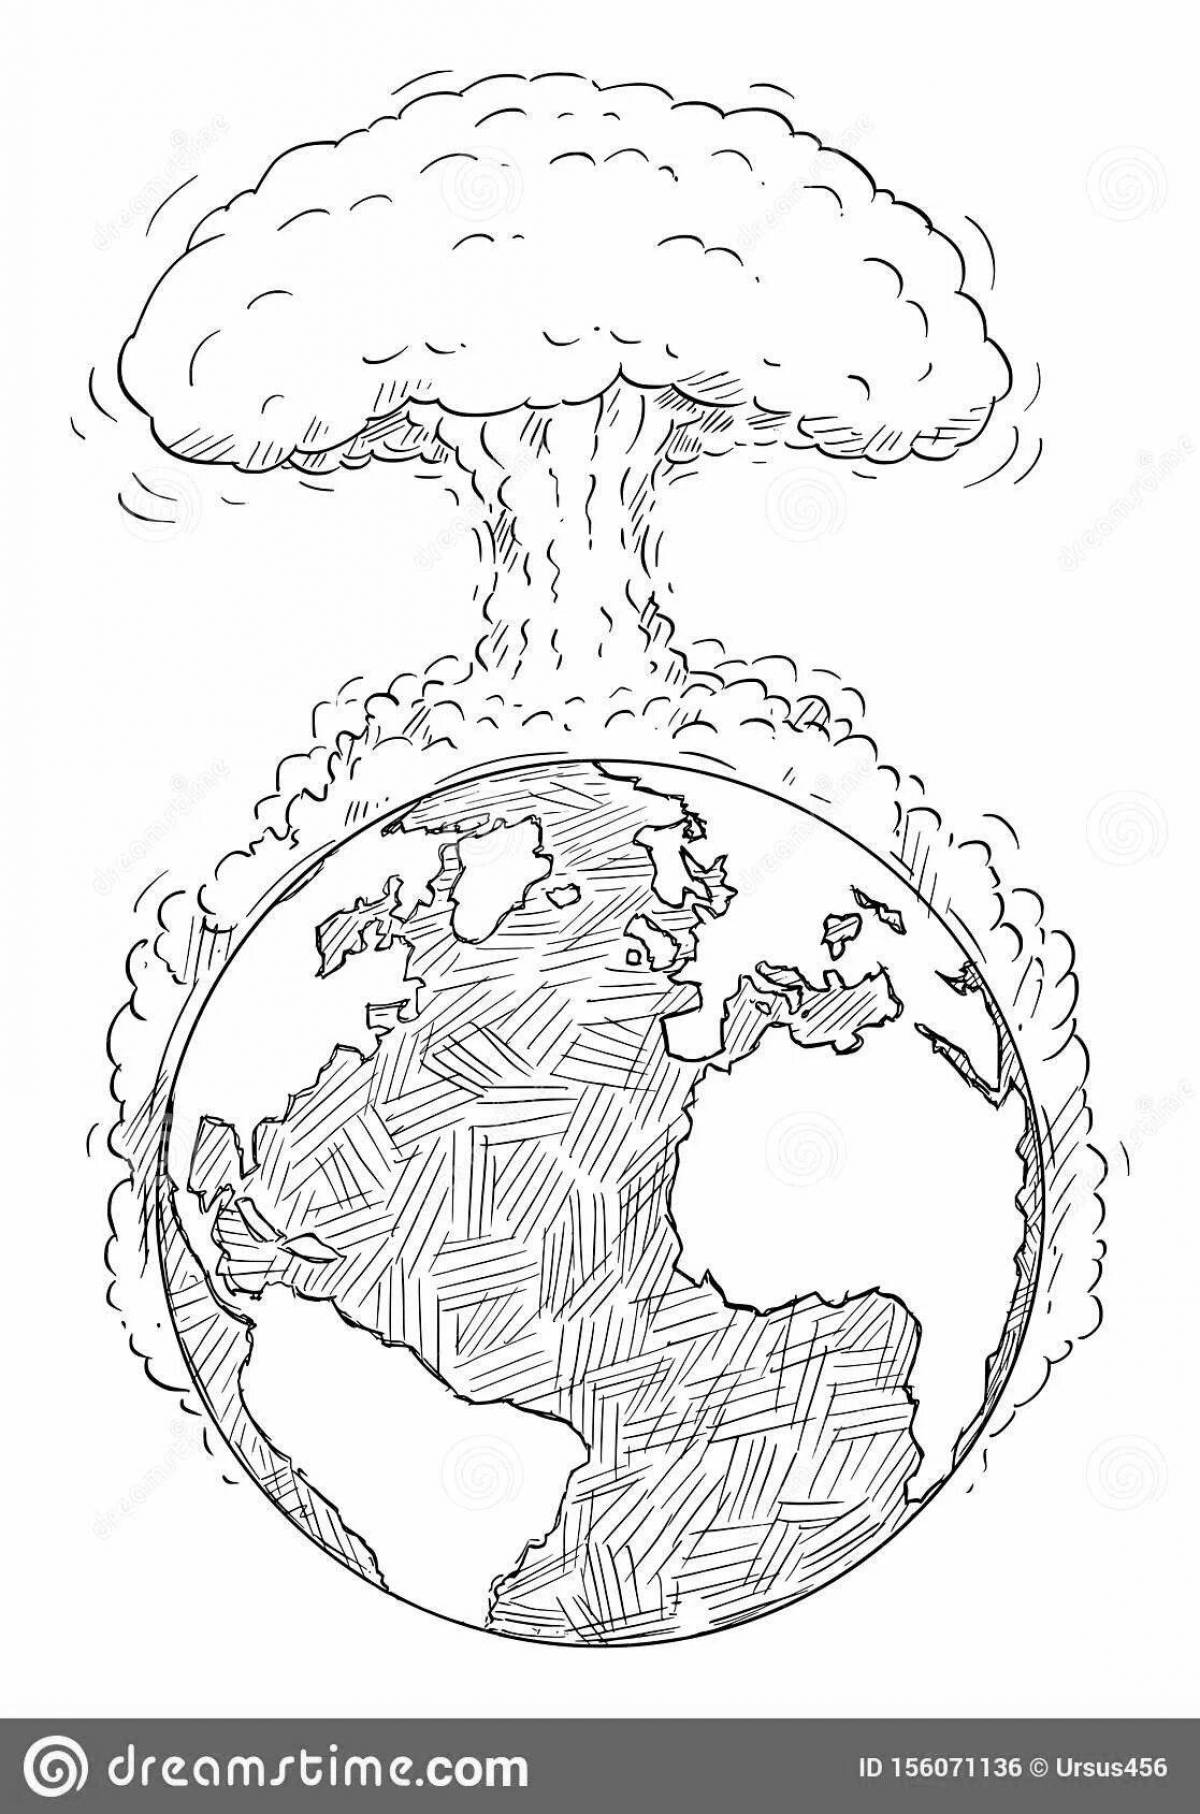 Amazingly beautiful nuclear explosion coloring book